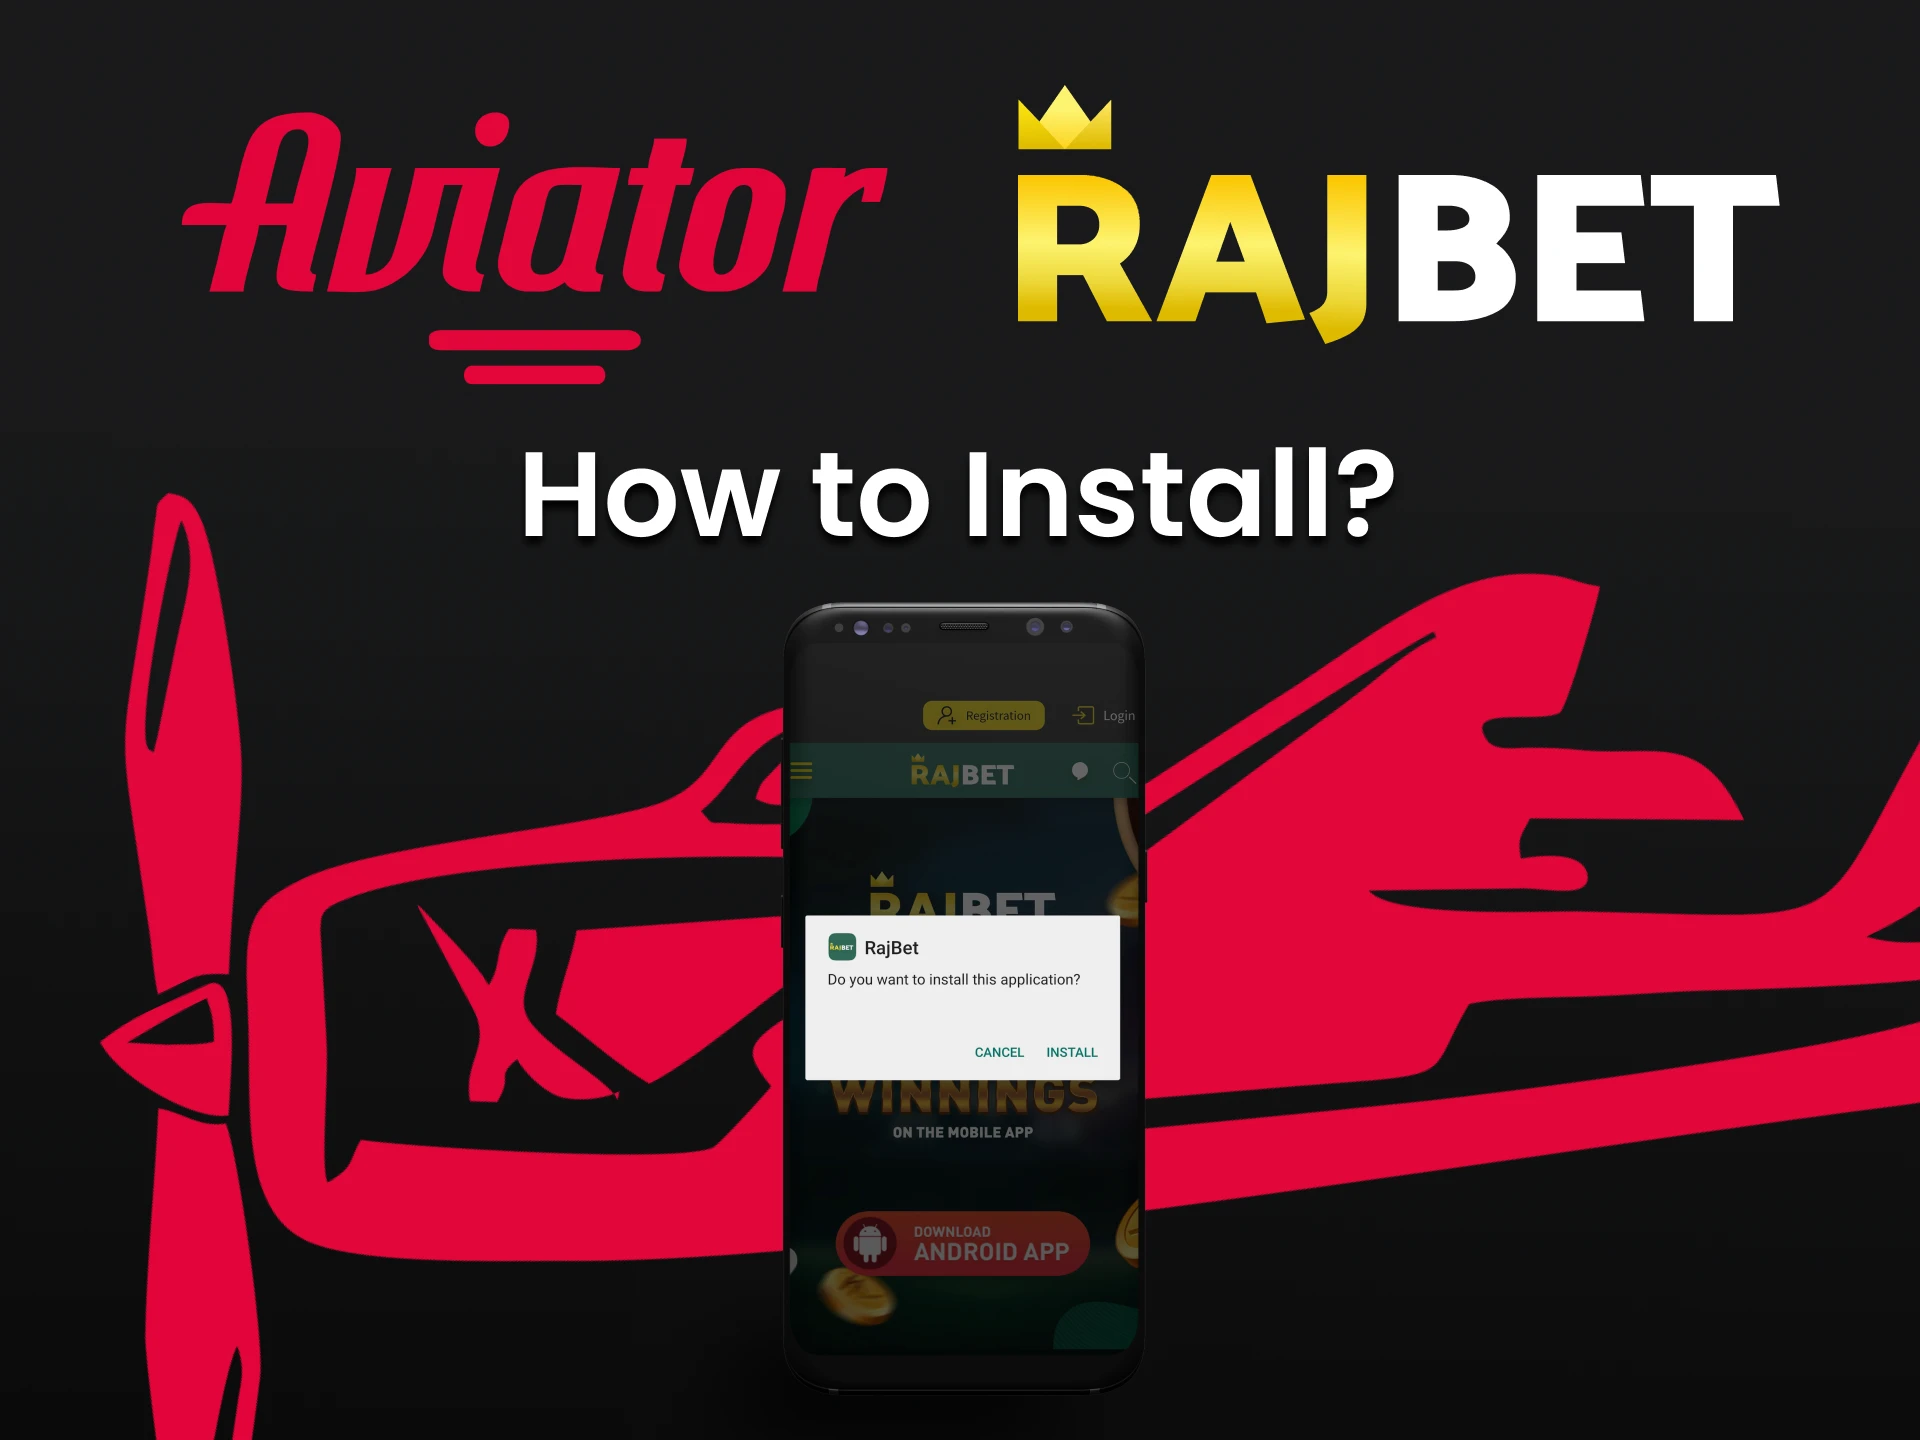 Install the Rajbet app and start playing Aviator.